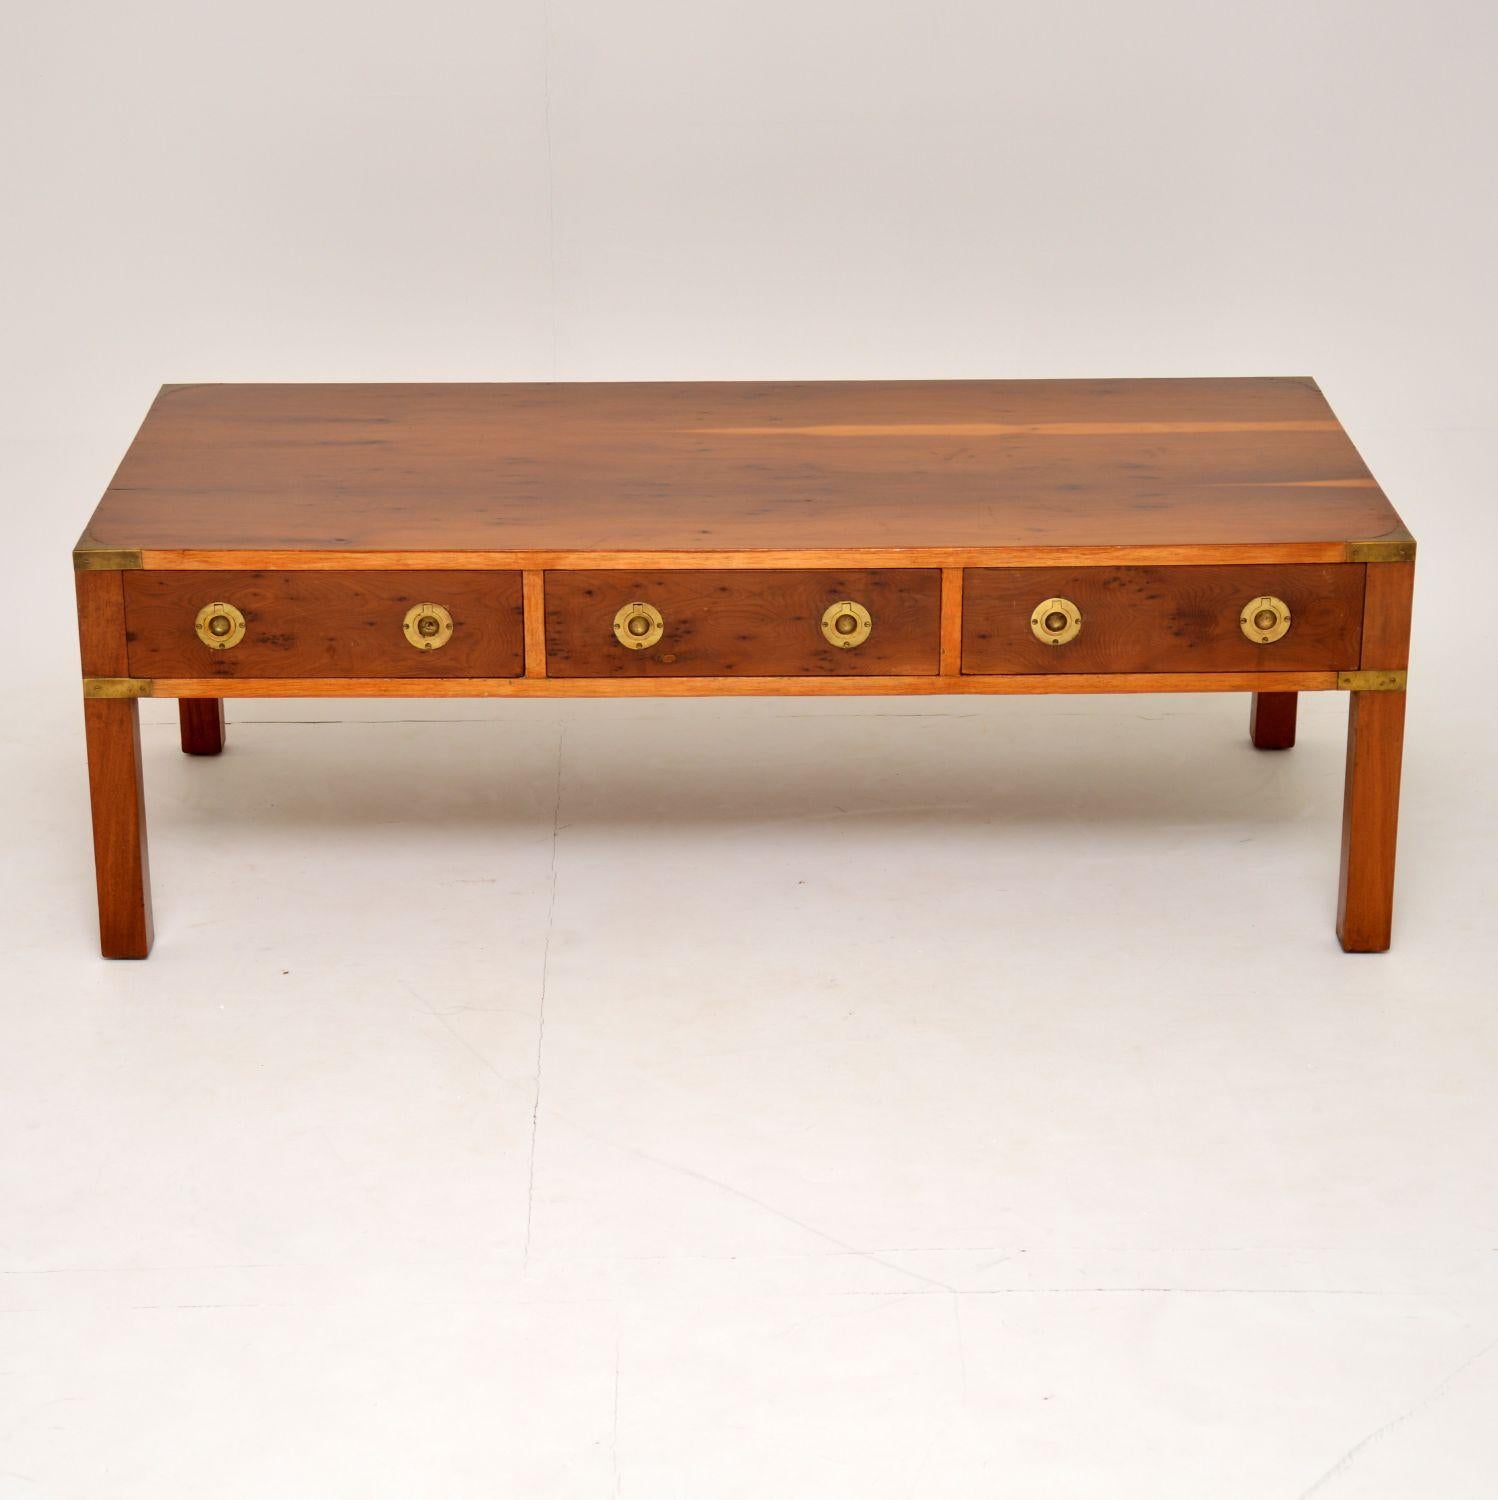 Large antique military Campaign style yew wood coffee table in excellent original condition & dating to circa 1950s period. It’s a strong looking table with a lovely warm colour & good figurings on the wood. There are brass corner fittings & the